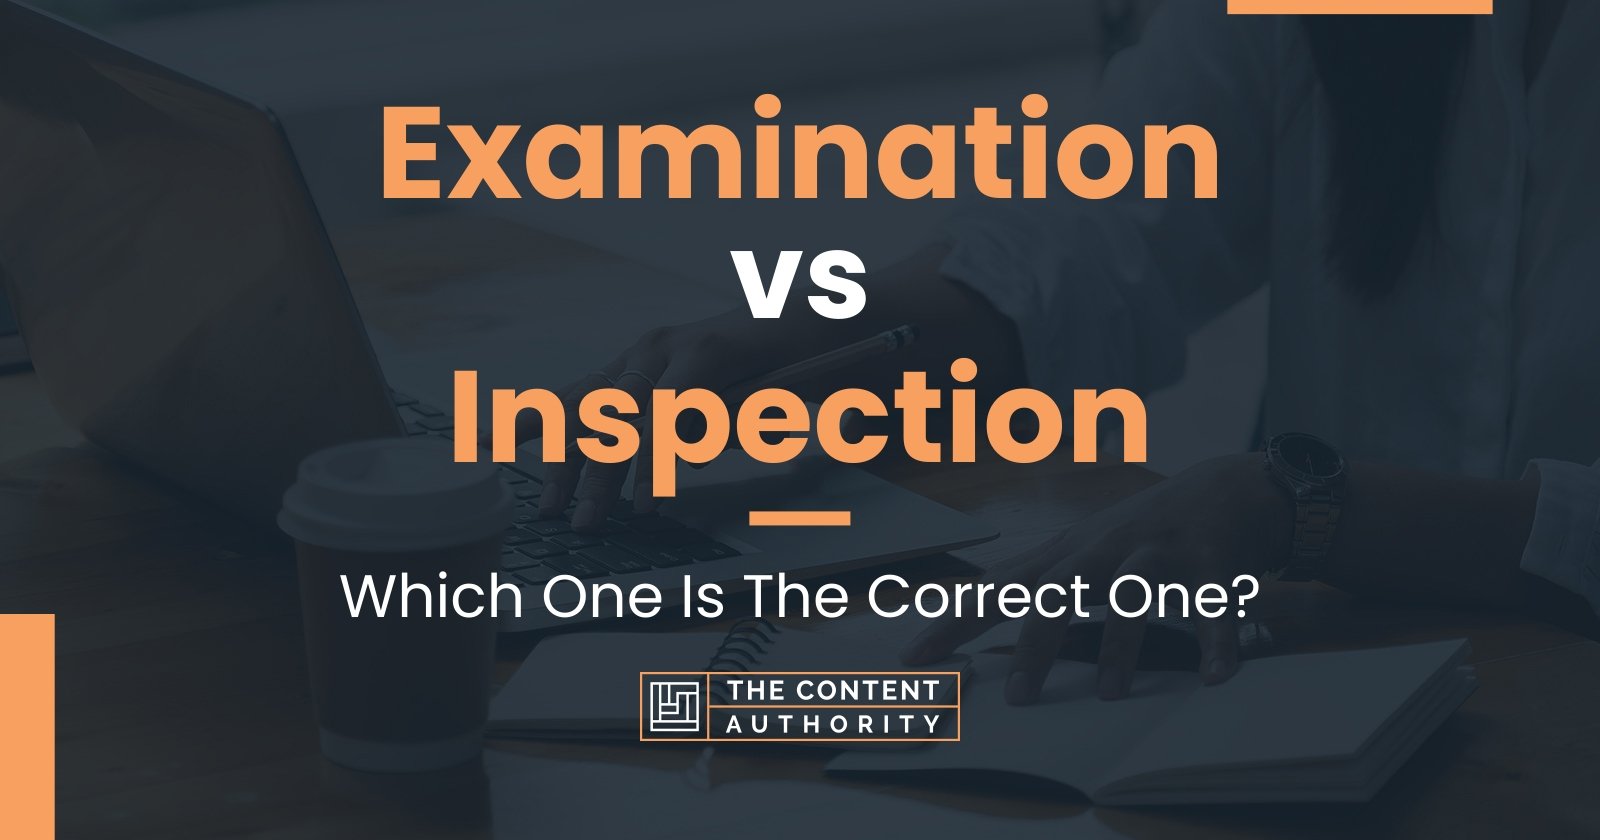 Examination vs Inspection: Which One Is The Correct One?